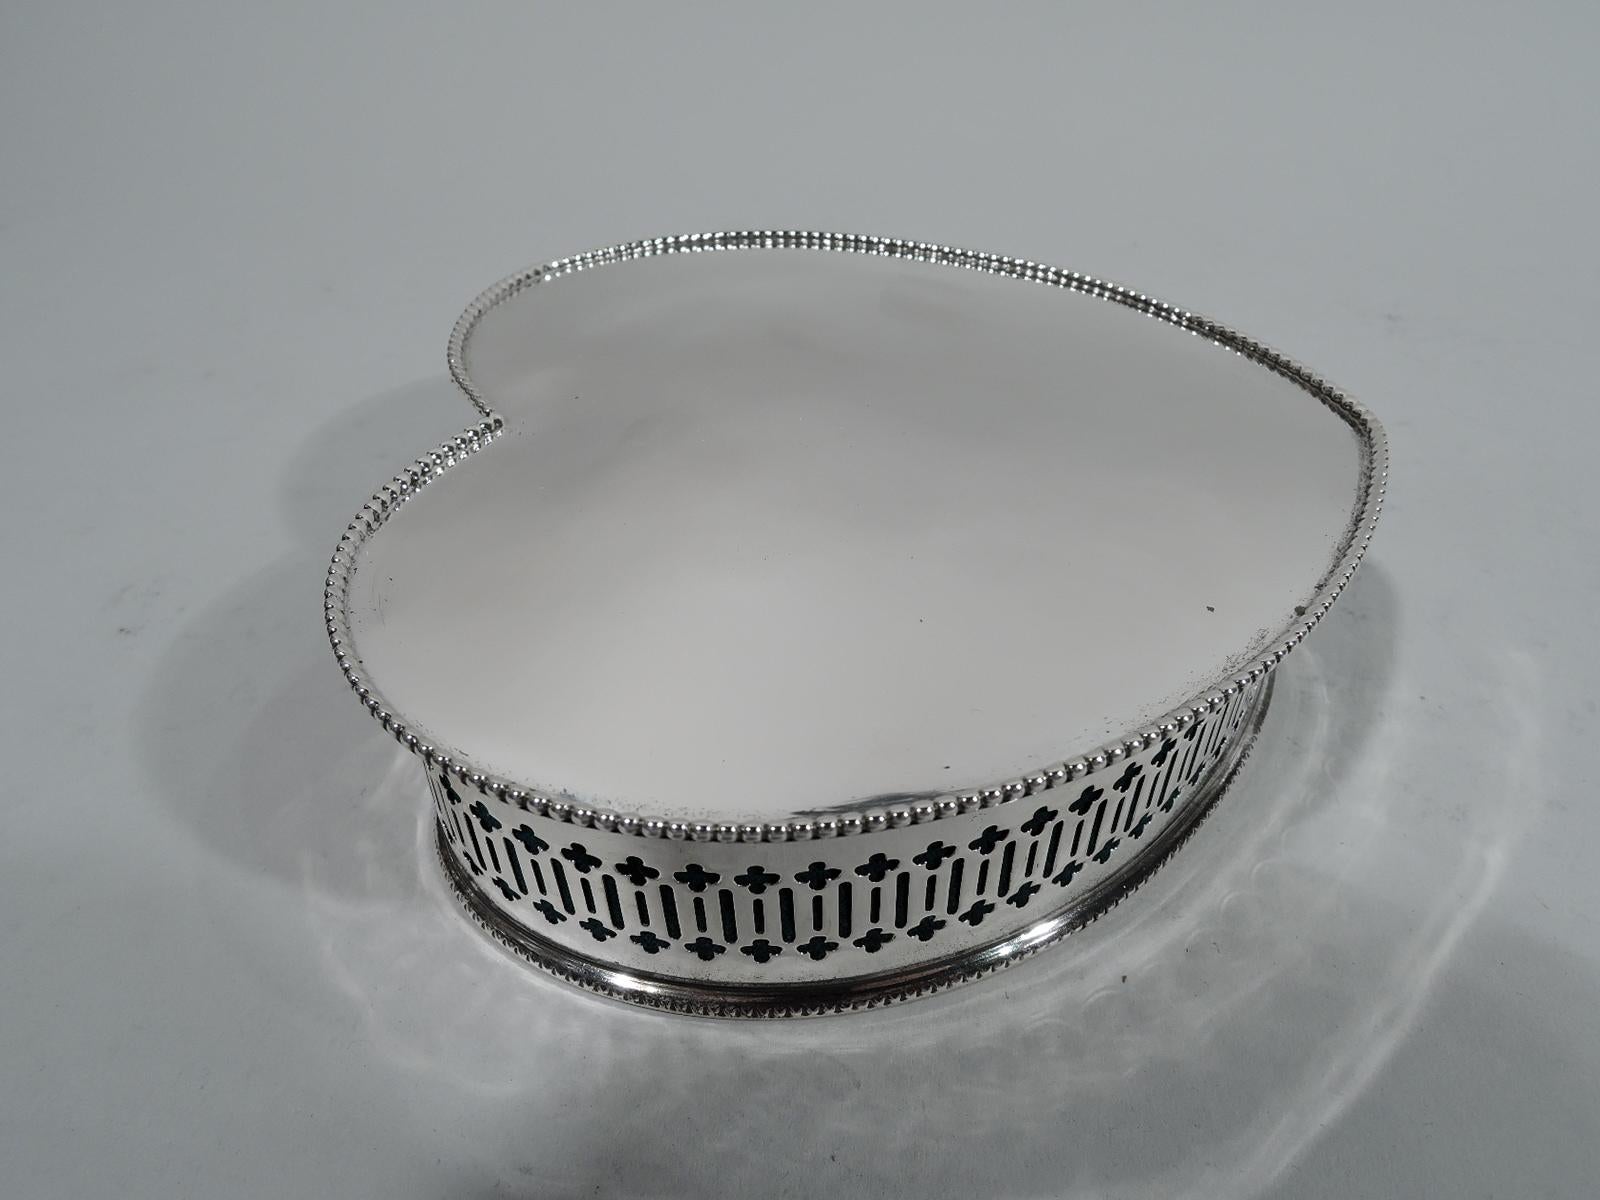 Edwardian sterling silver jewelry box. Made by Alvin in Providence, circa 1910. Heart-shaped. Sides have pierced quatrefoils and lines, and base dentil rim. Cover hinged and curved with beaded rim. Underside open. Velvet liner. Fully marked and